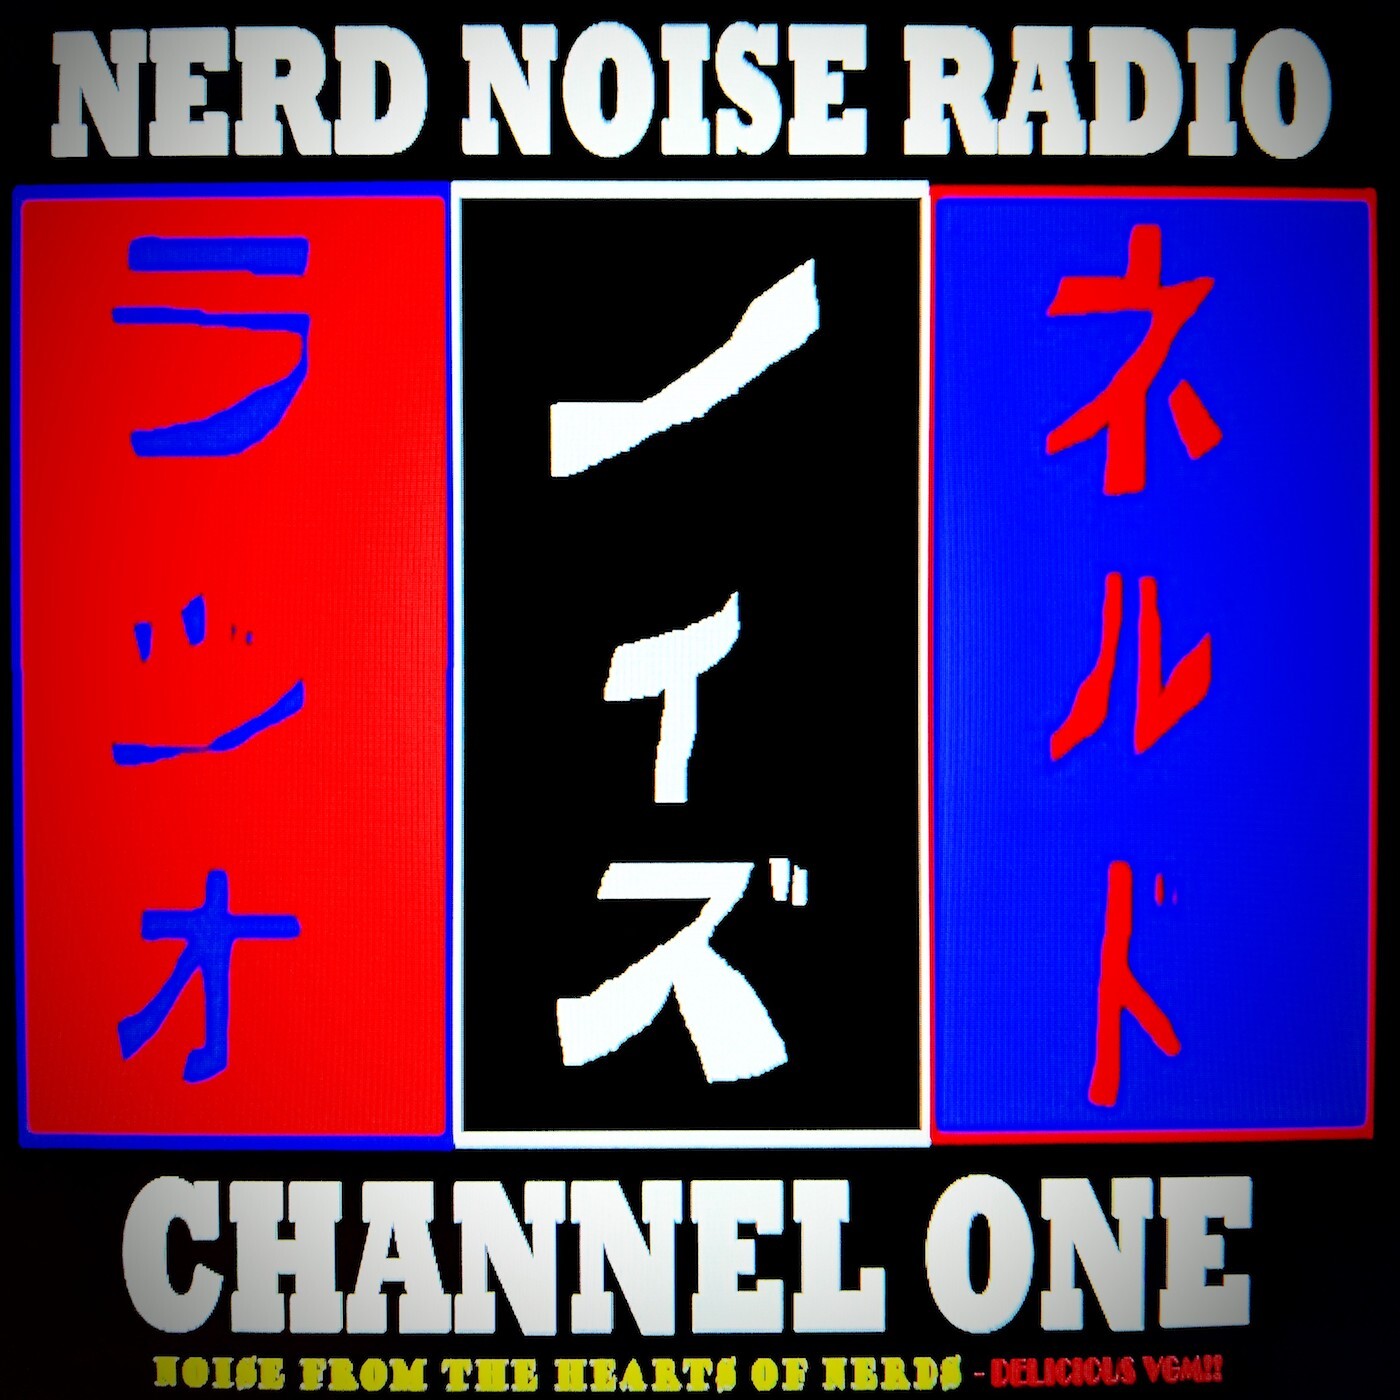 Nerd Noise Radio - Channel 1: ”Noise from the Hearts of Nerds” Podcast - “C1E34: Nerd Noise Crossovers - vol. 2: TwoFer Soundtrack Saturday: Contra, and Super C Soundtracks”